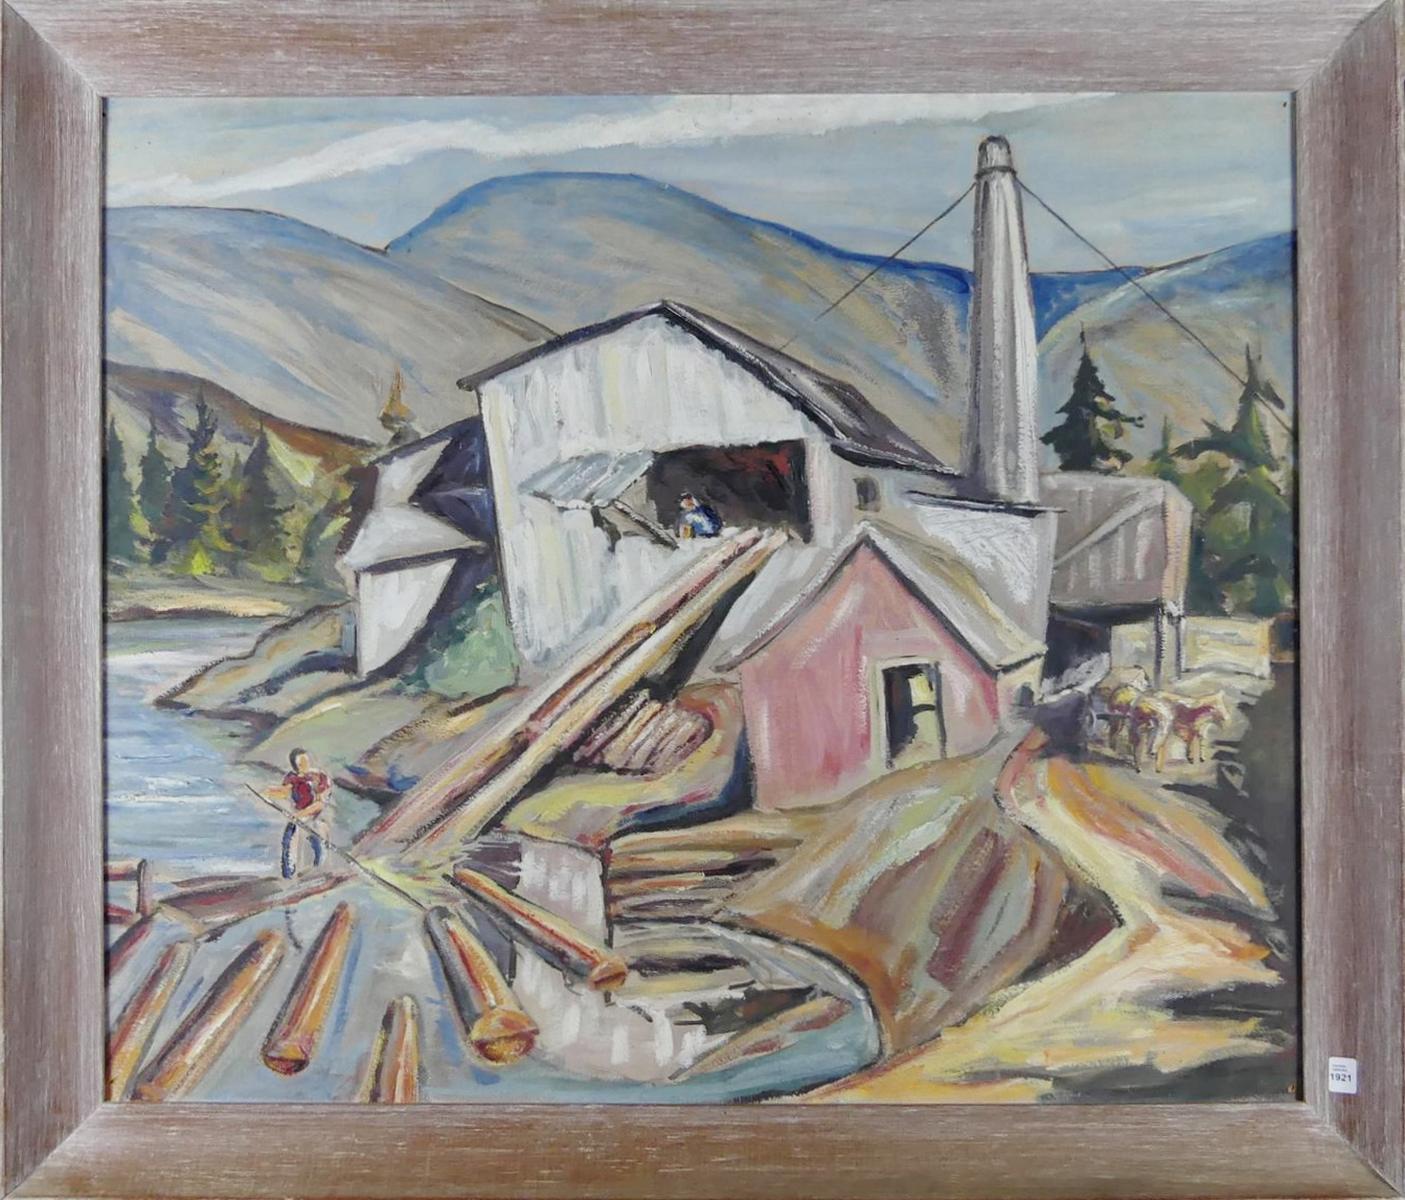 MID-2OTH CENTURY CANADIAN OIL